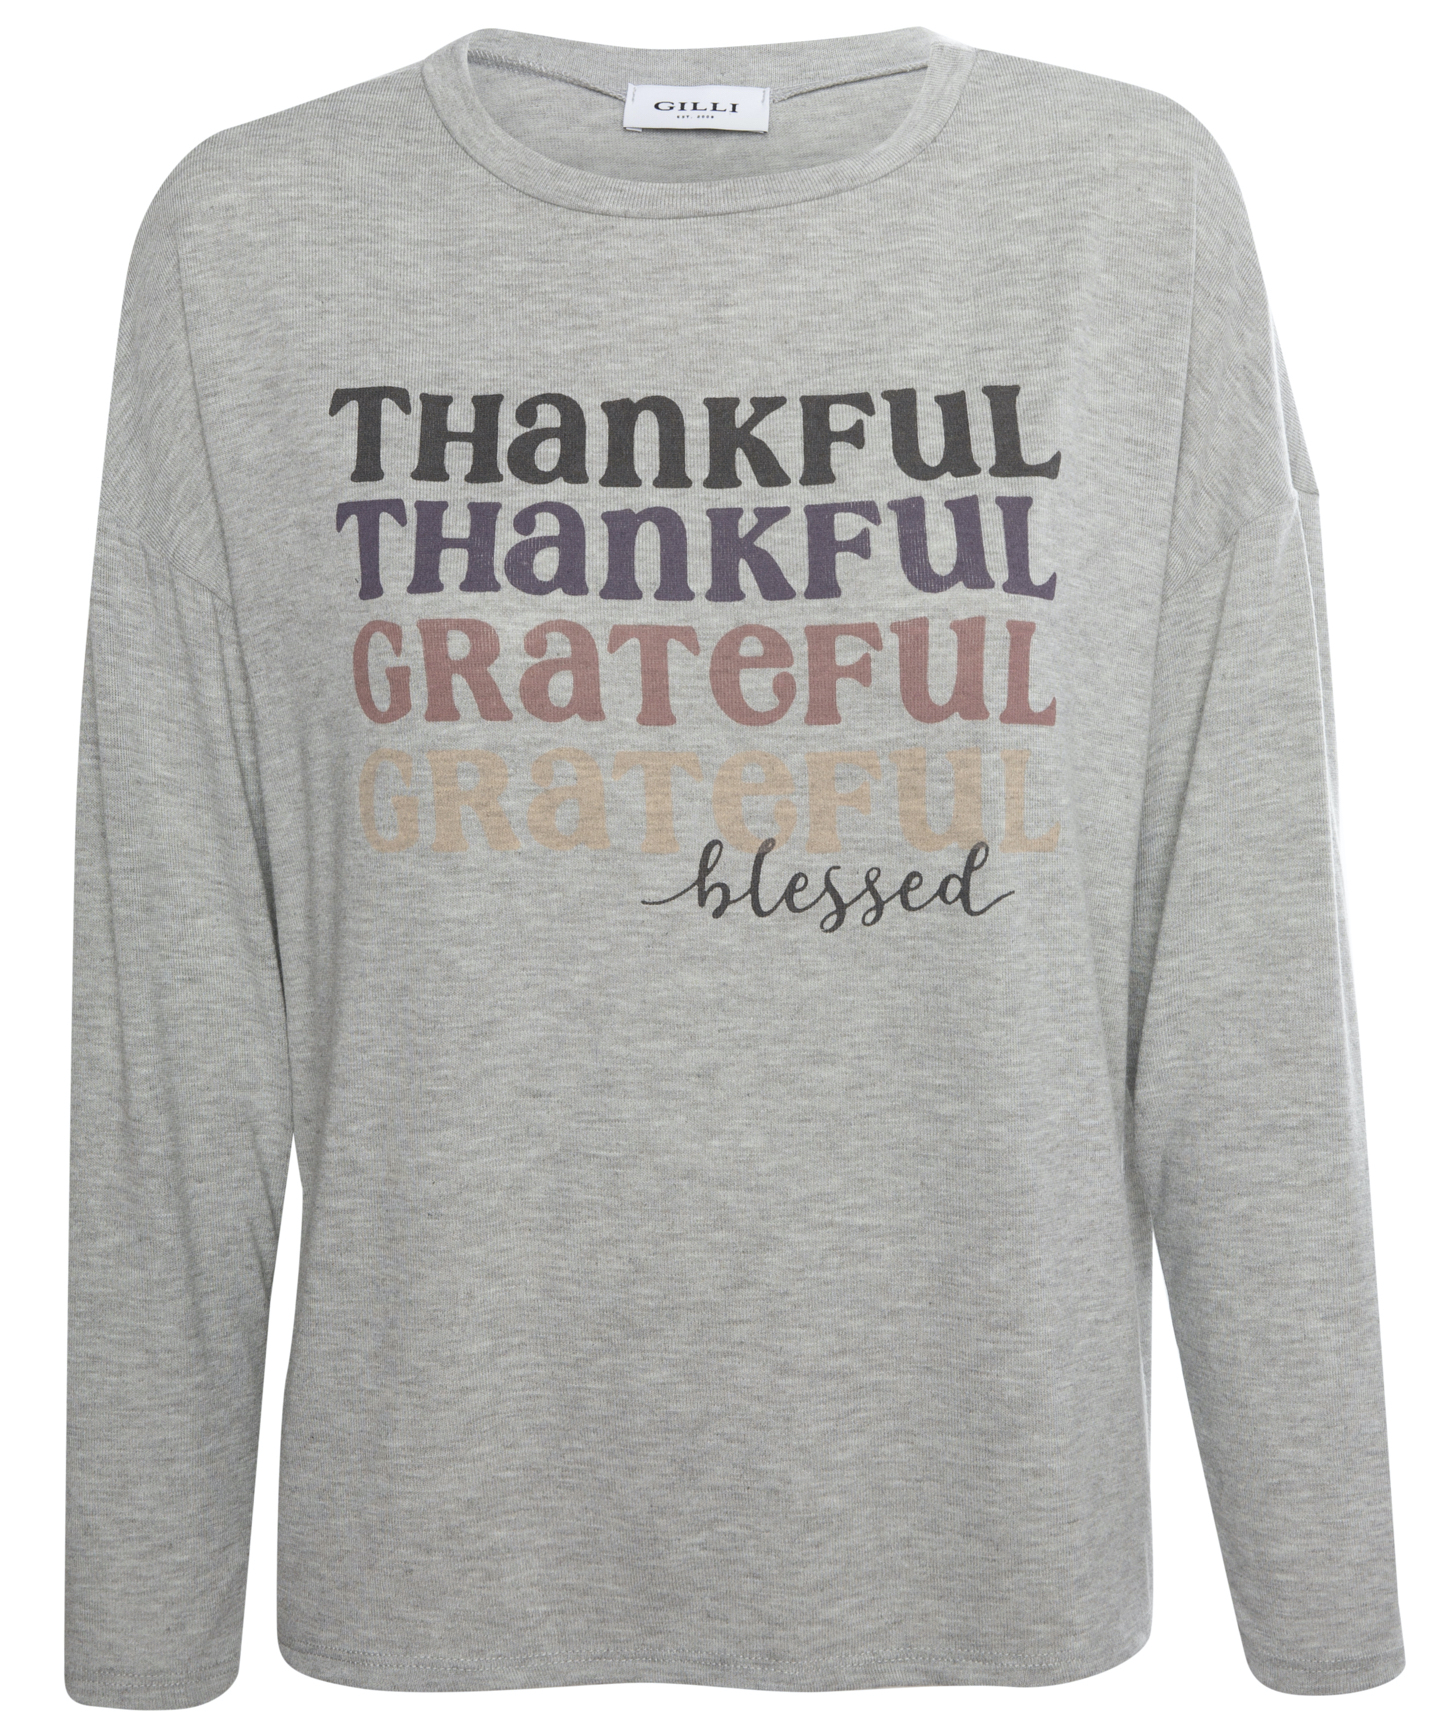 'Thankful/Grateful/Blessed' Graphic Print Top